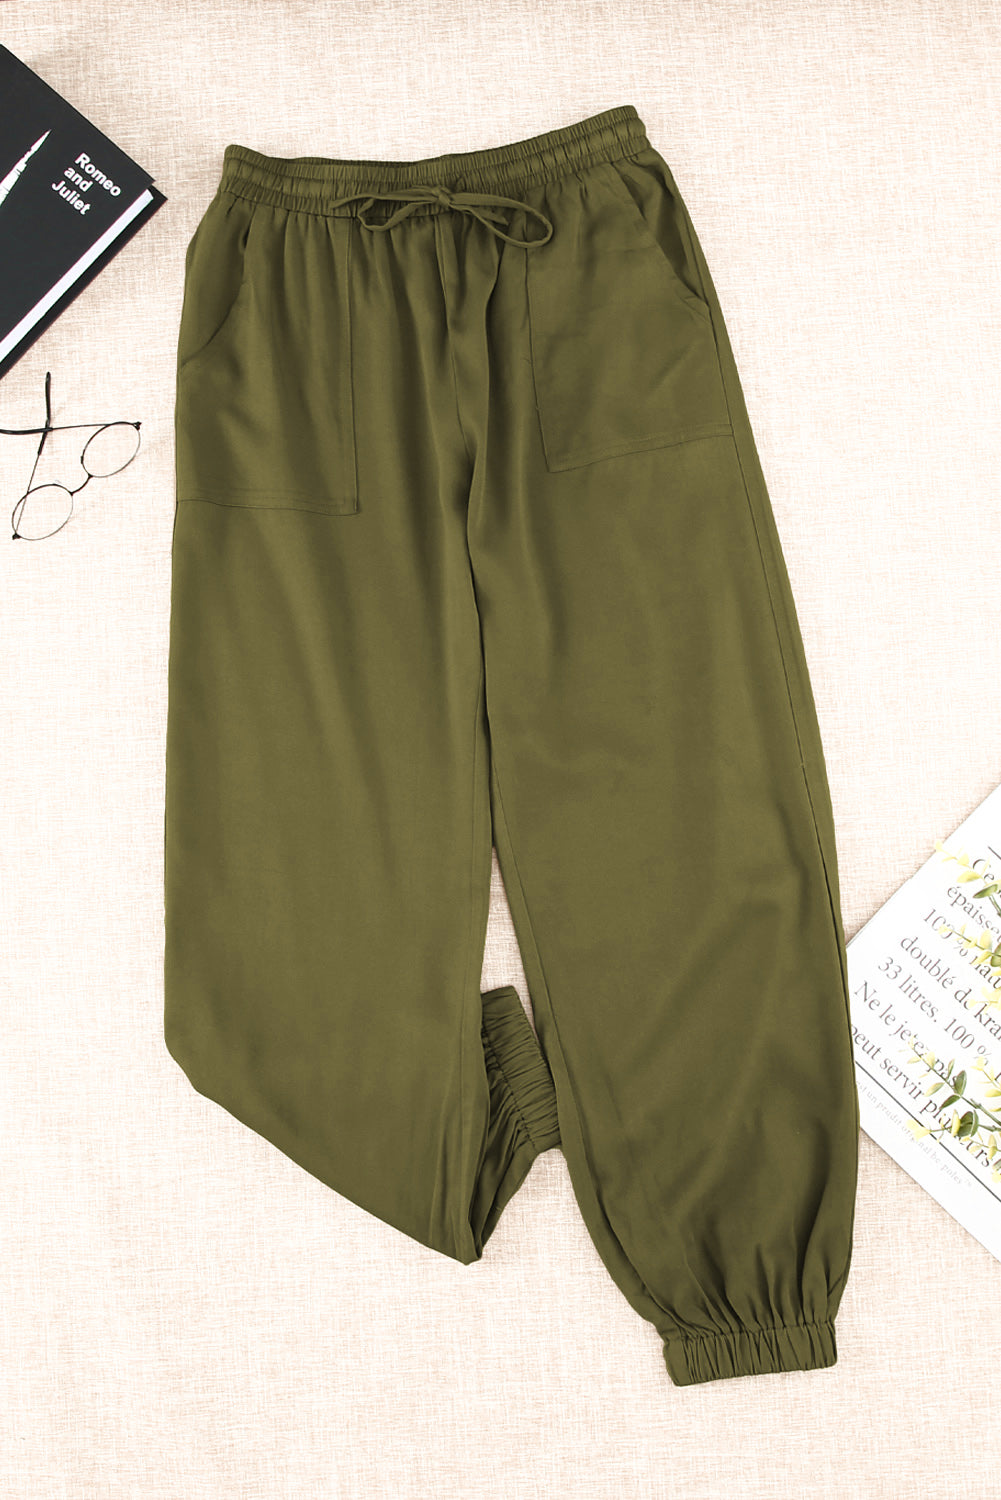 Dark Olive Green Drawstring Waist Joggers with Pockets Sentient Beauty Fashions Apparel & Accessories